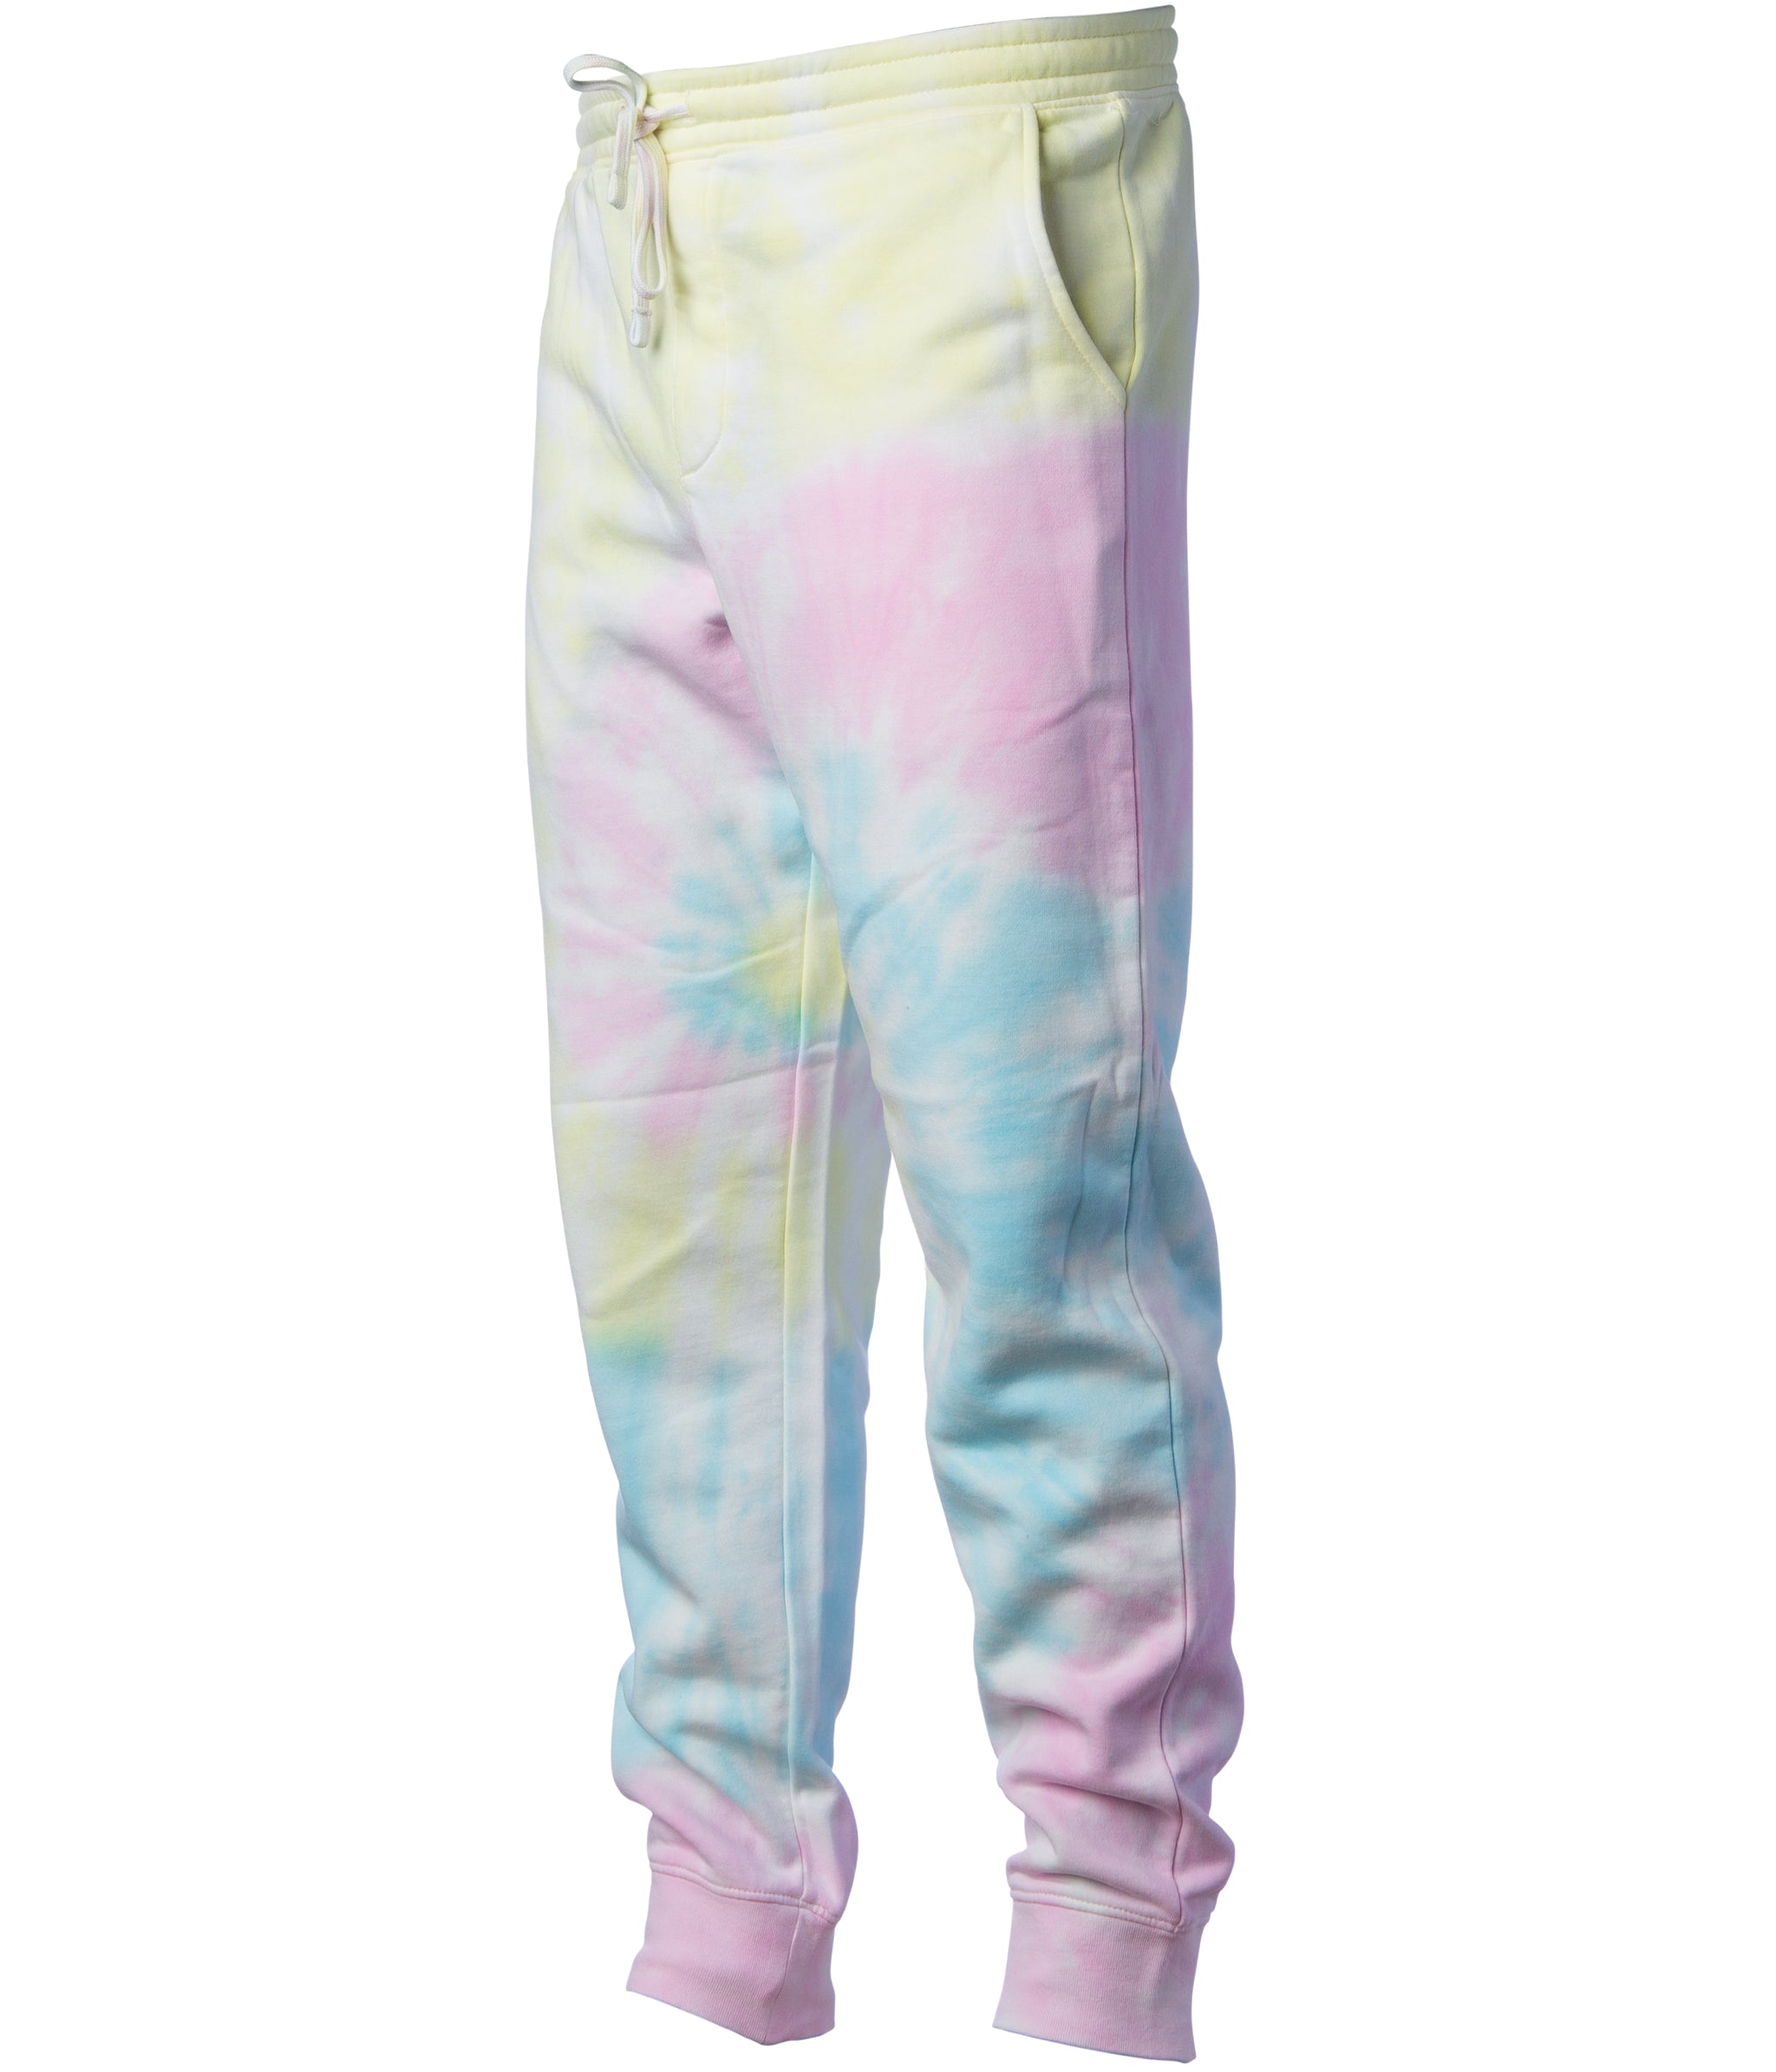 Tie Dye Pants Harajuku Long Pants For Men Women Ulzzang Korean Style  Trousers Streetwear Vintage Clothes Spring Summer From Caicloth, $35.5 |  DHgate.Com